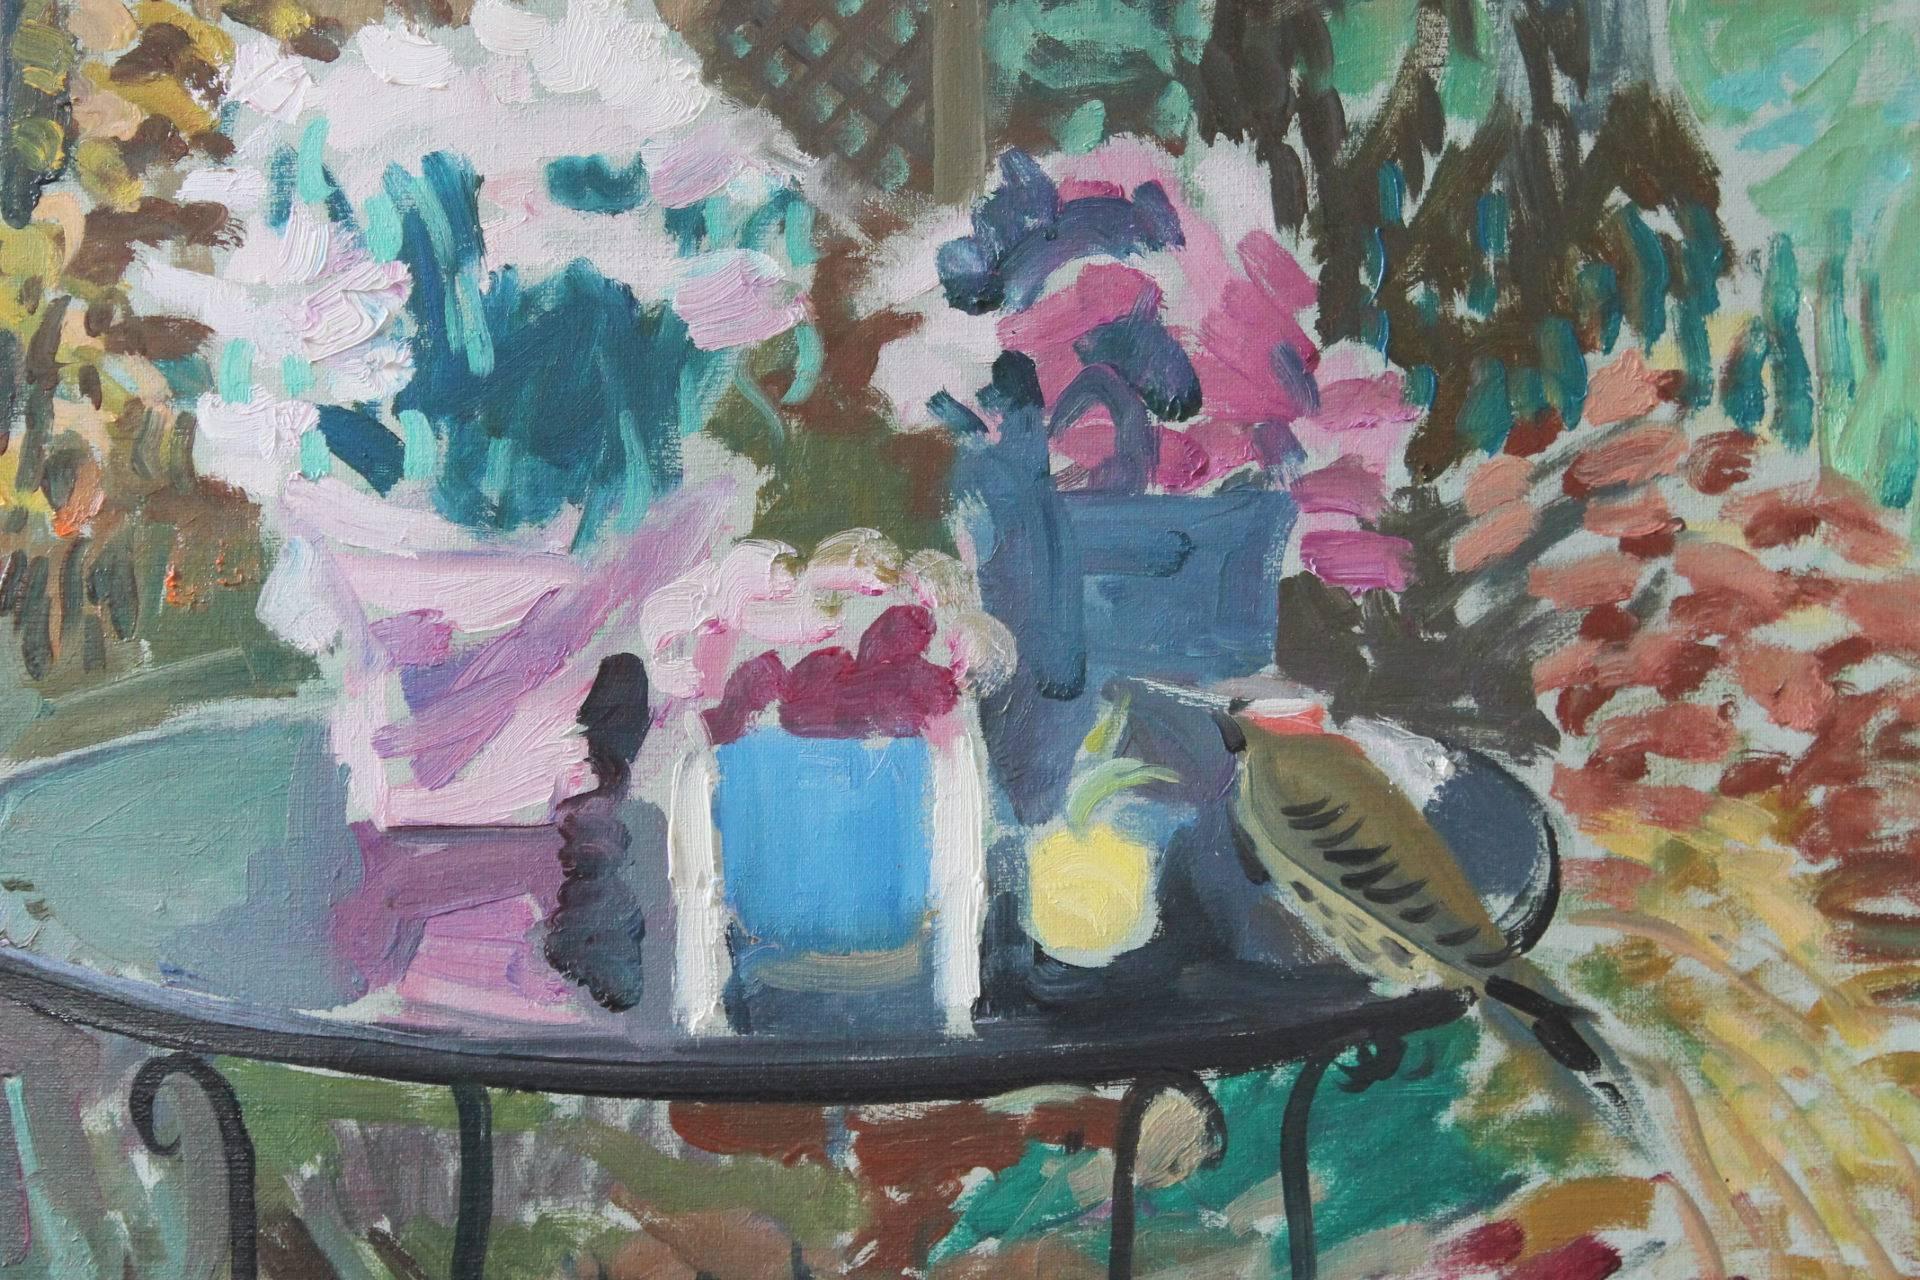 Garden Still Life with Table and Bird - American Modern Painting by Joseph O'Sickey